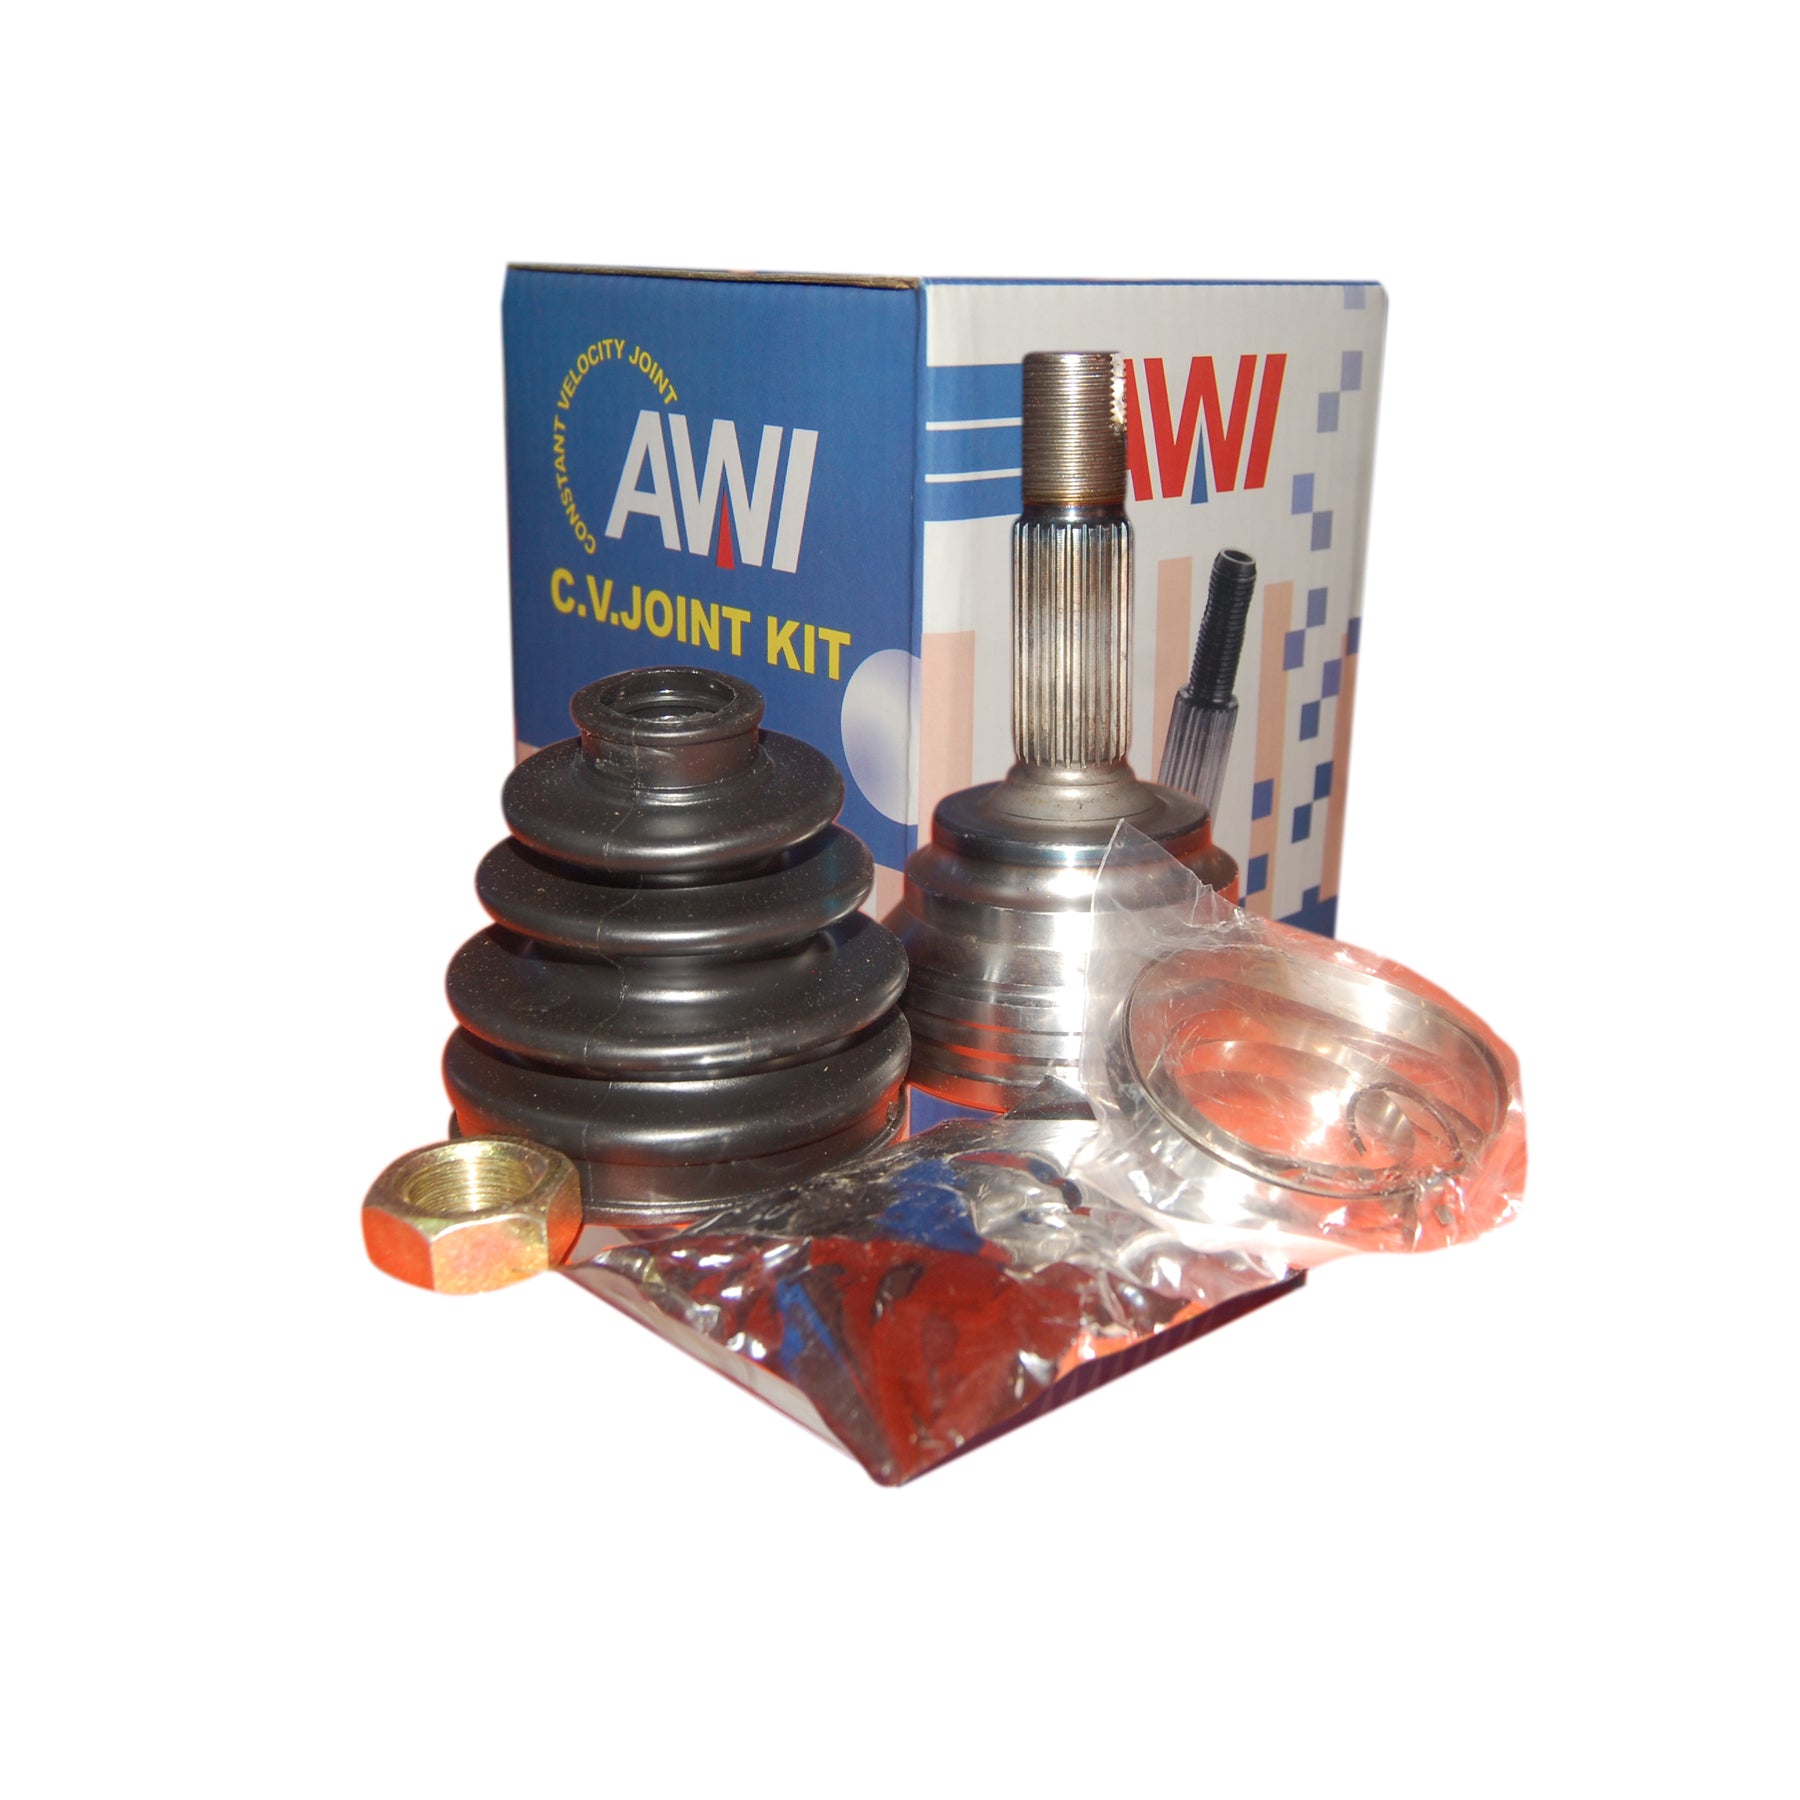 CV Joint, AWI, 43470-59045, TO-35A48, 23(in)x58(D)x24(out) (007634) - Win Store